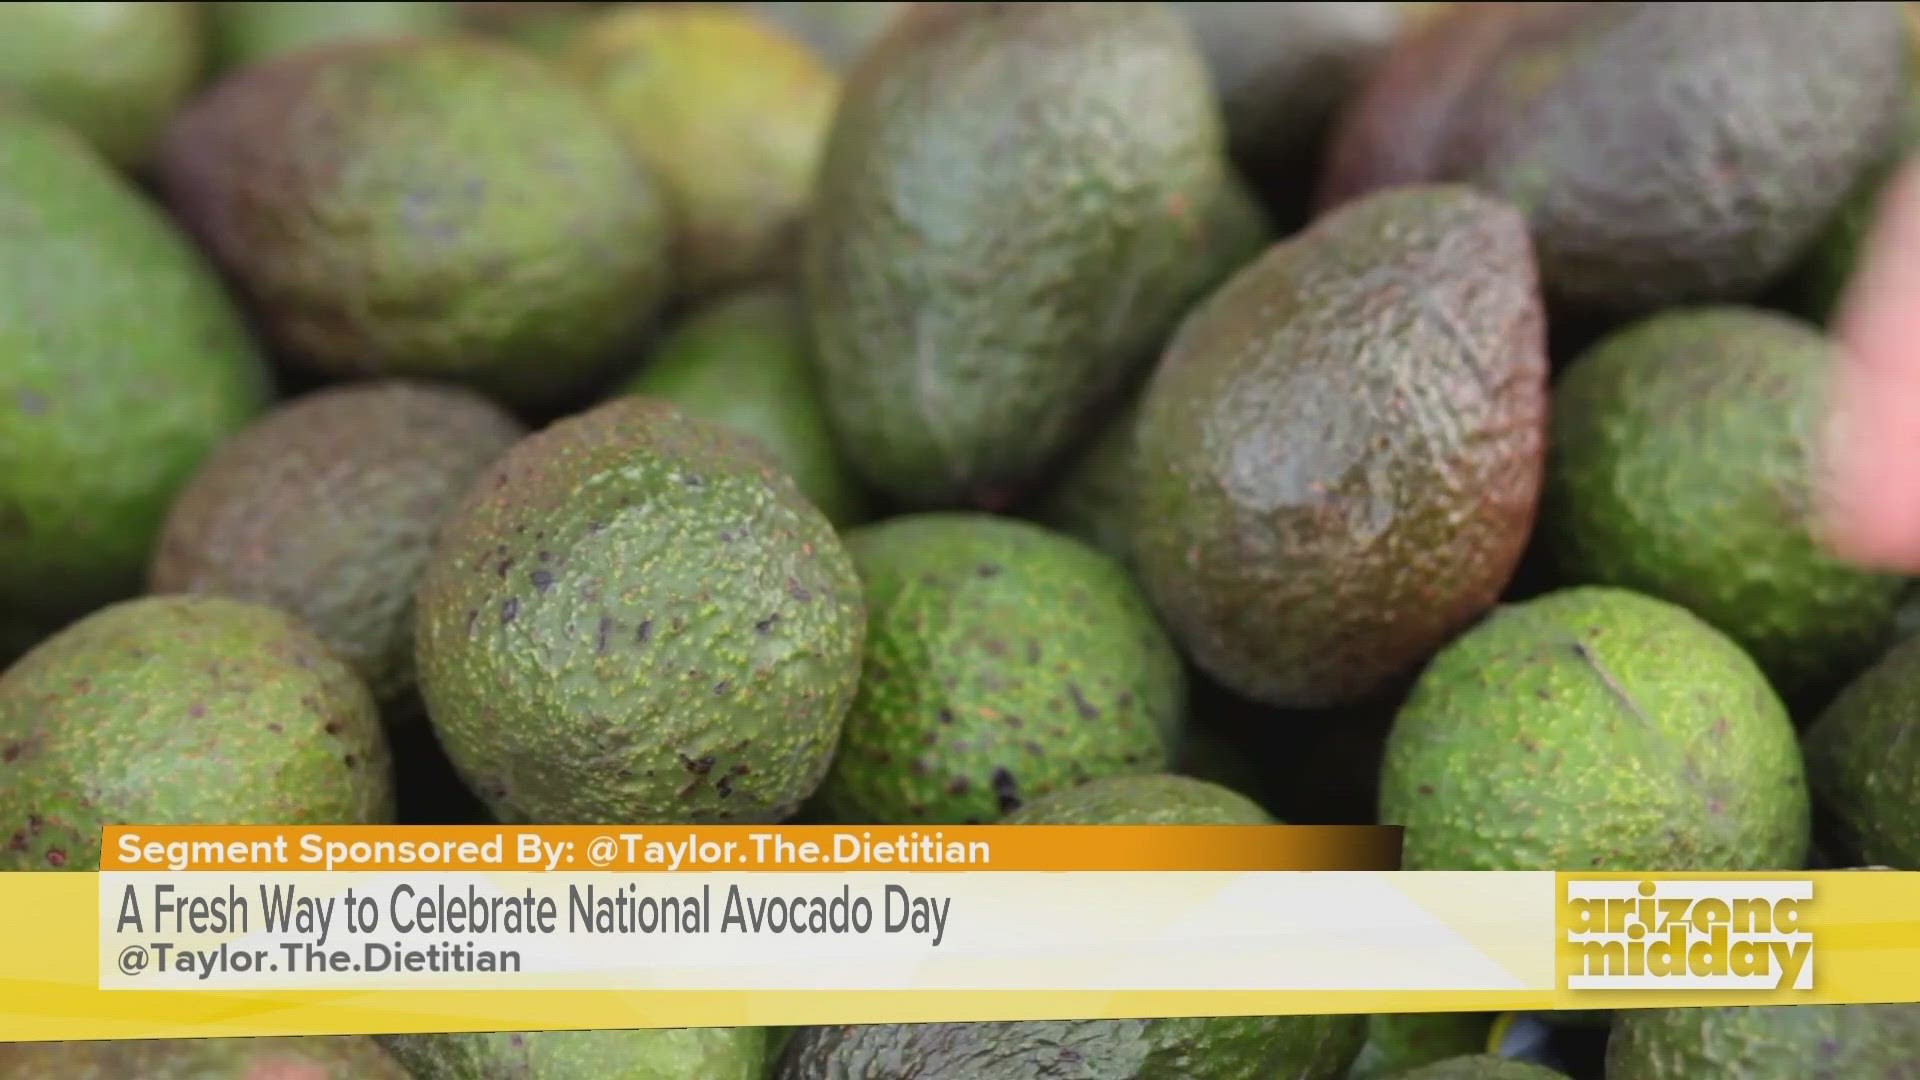 Taylor Janulewicz a registered dietician shares an easy recipe and breaks down everything we need to know about the avocado.